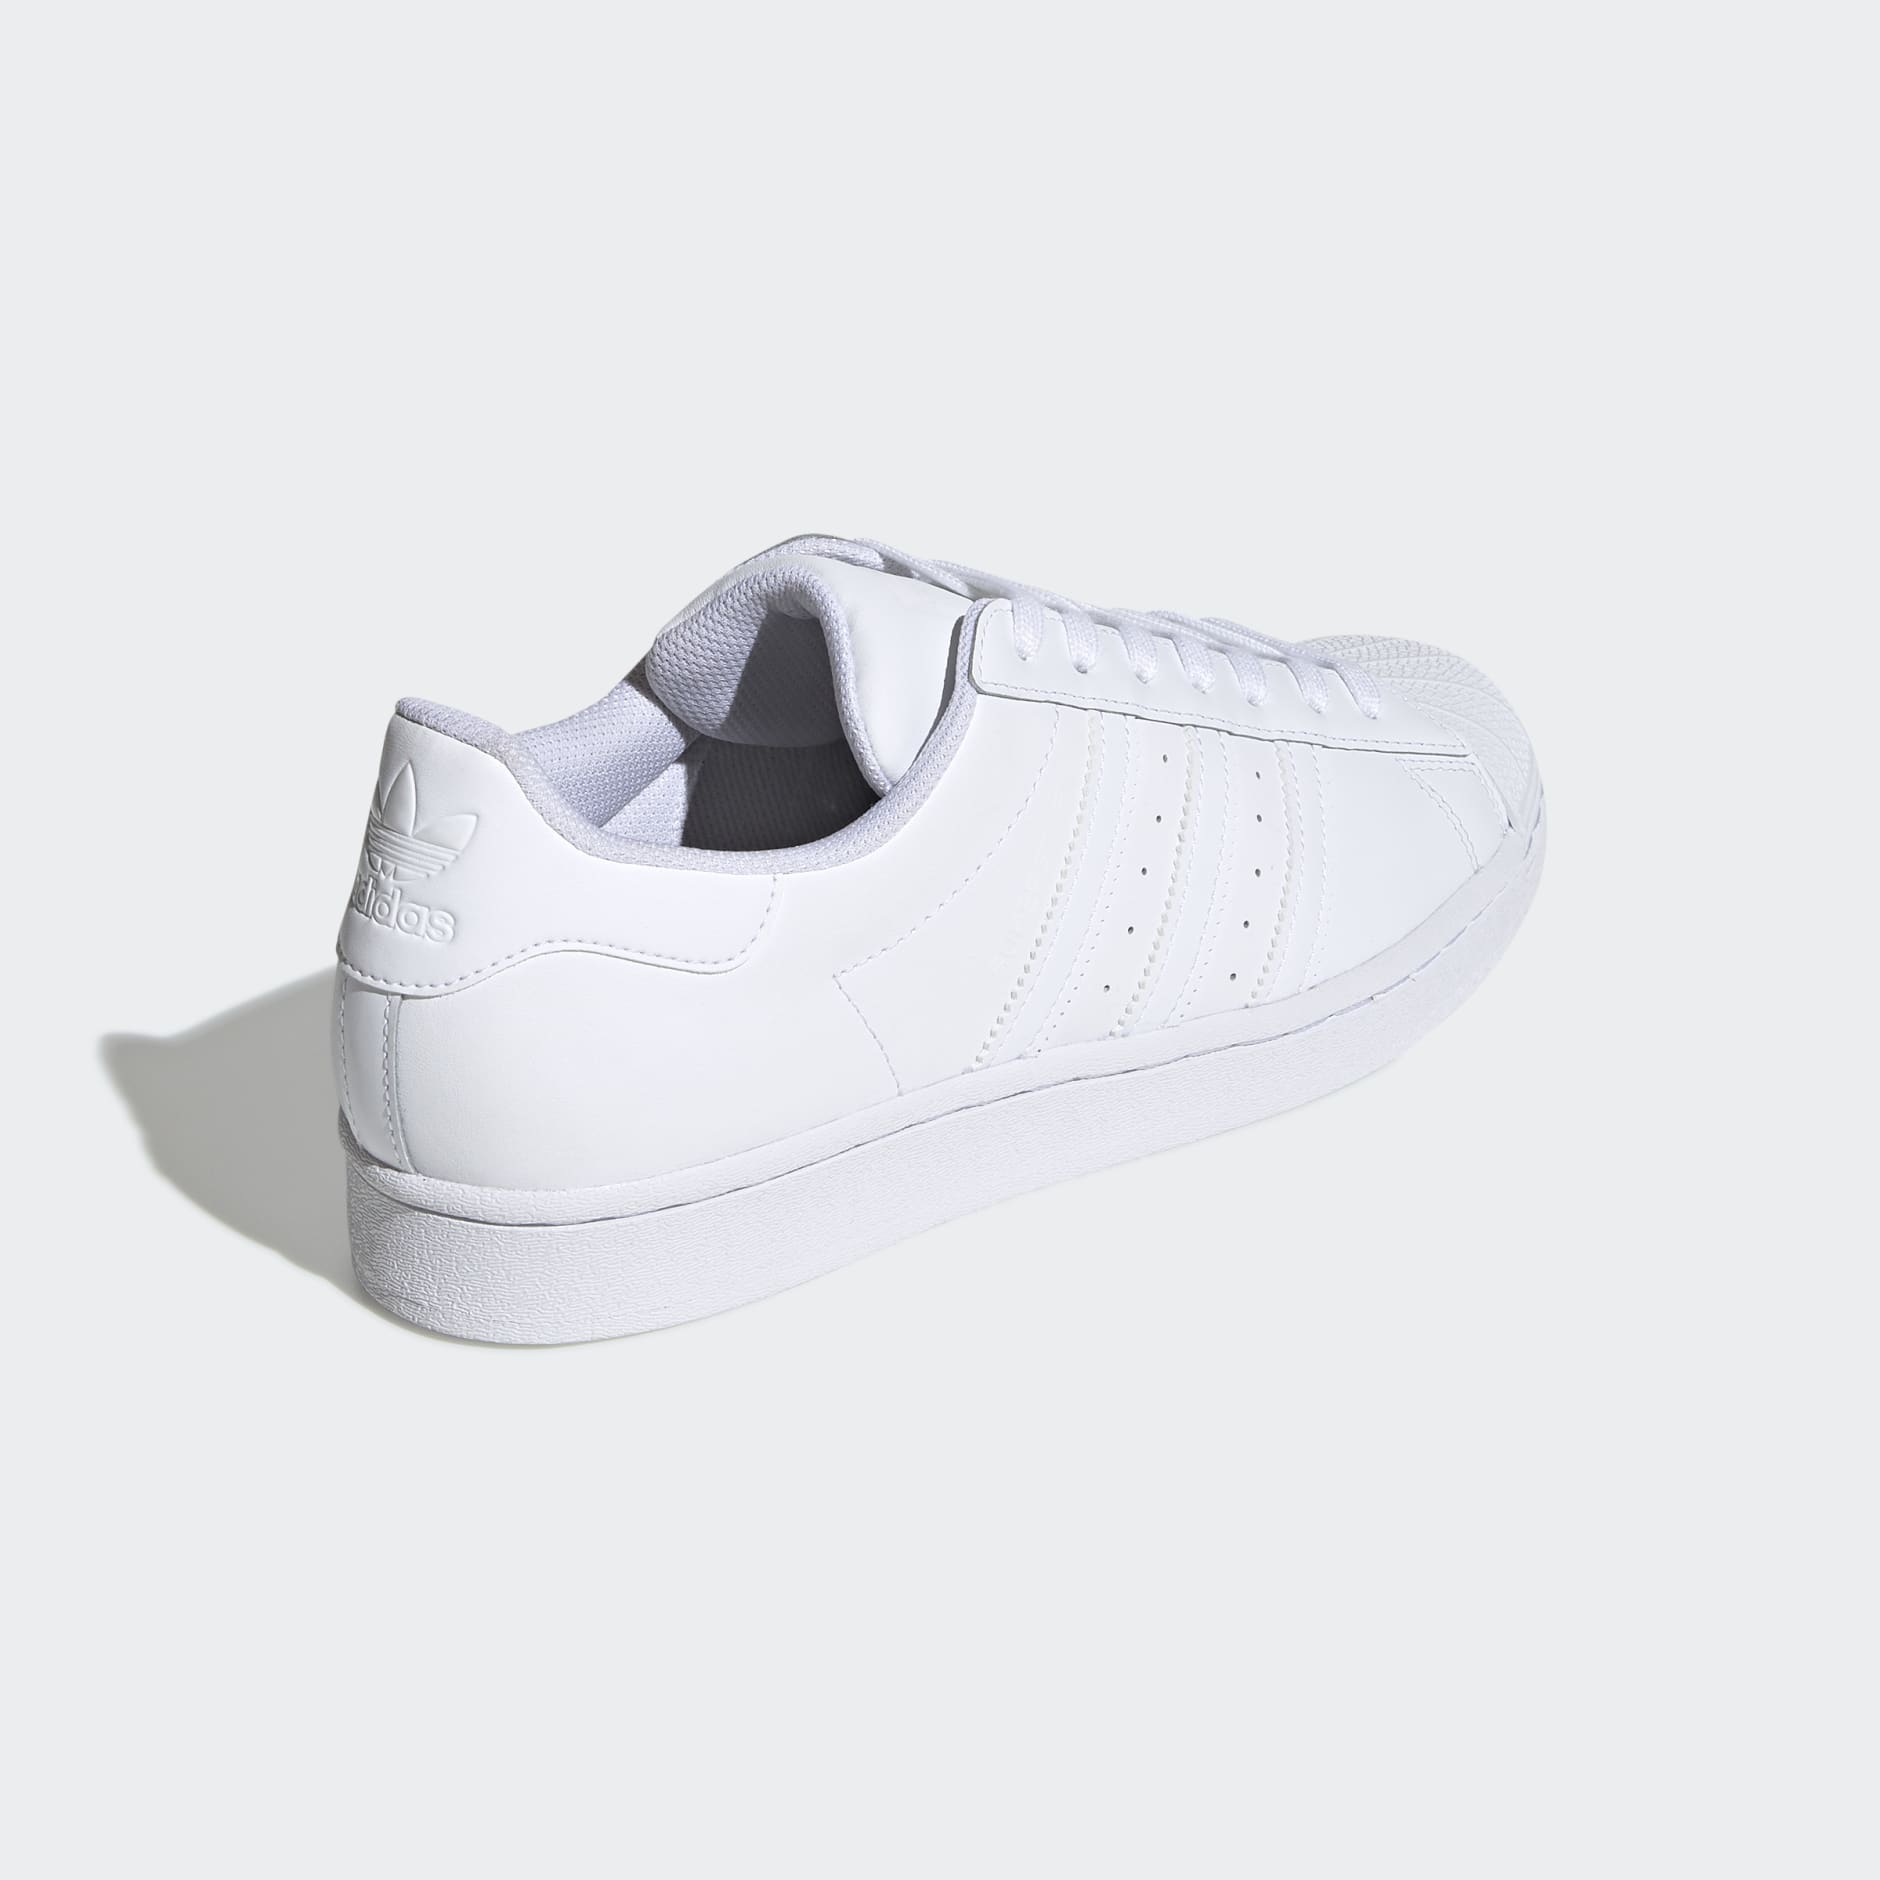 adidas SUPERSTAR SHOES - White